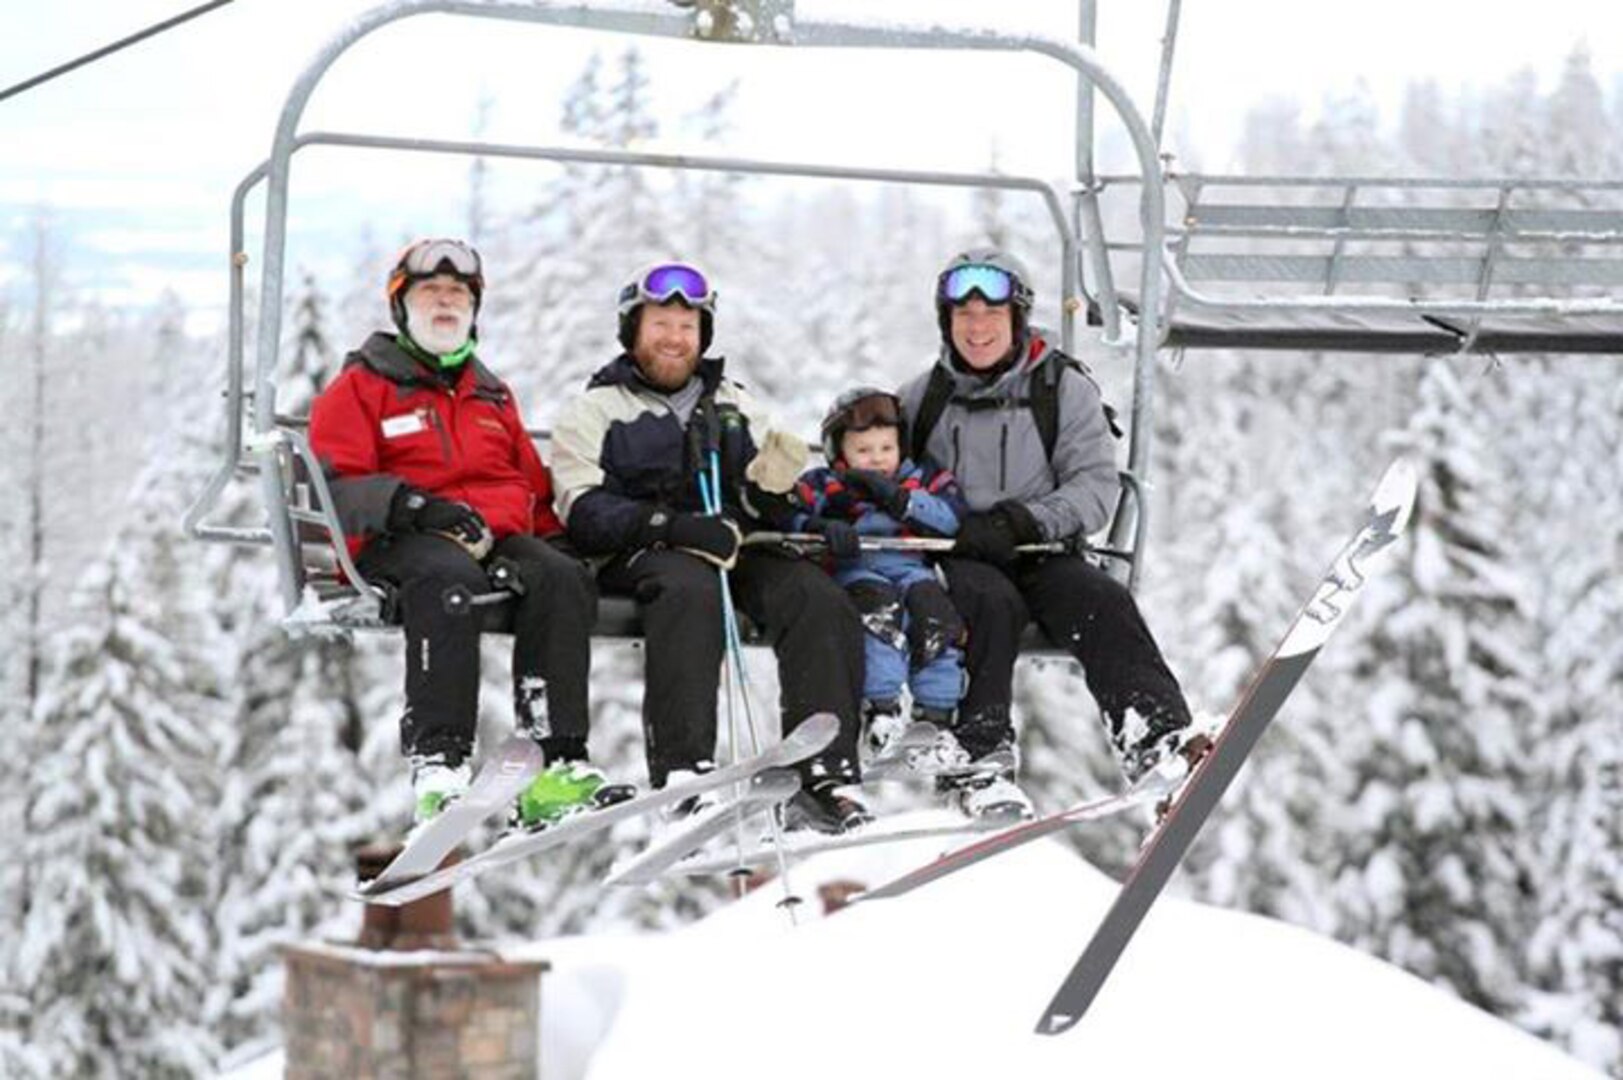 Volunteers from Whitefish Mountain Resort join Kenny Walker,
second from the left and youngest son Kelson on the chairlift at the
Whitefish Mountain Resort in January